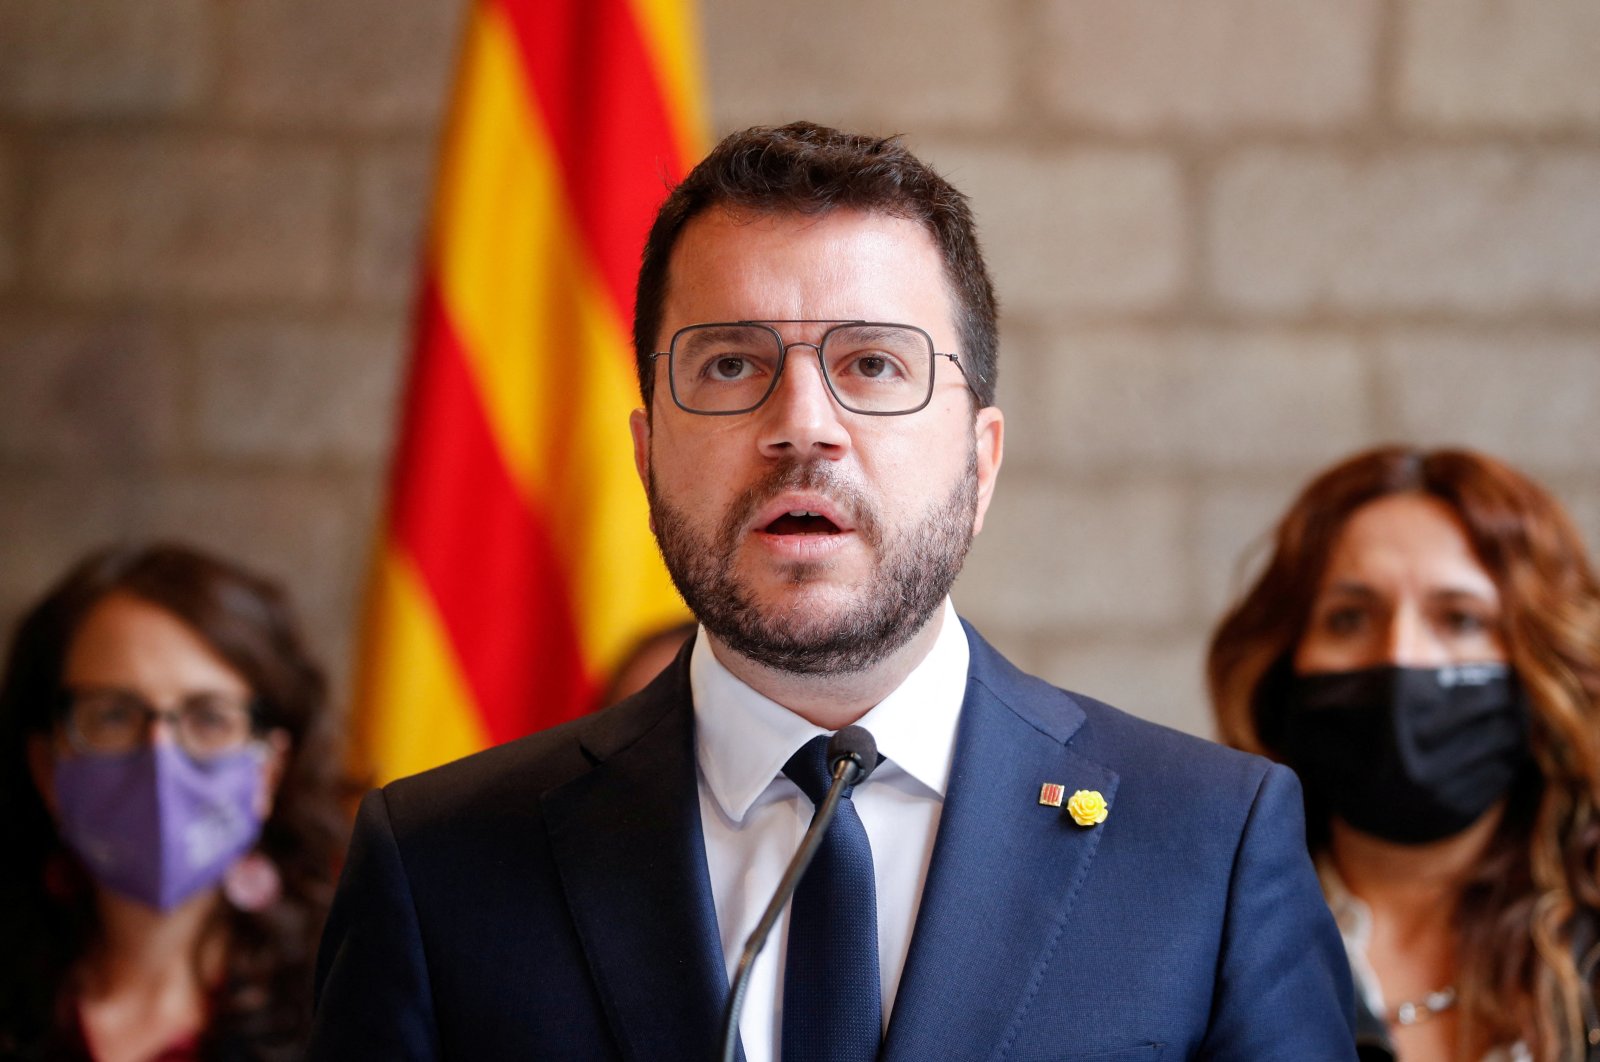 Catalonia&#039;s regional President Pere Aragones gives a news conference at Palau de la Generalitat, following the arrest of former Catalan government head Carles Puigdemont in Sardinia on Thursday, in Barcelona, Spain, Sept. 24, 2021. (Reuters Photo)